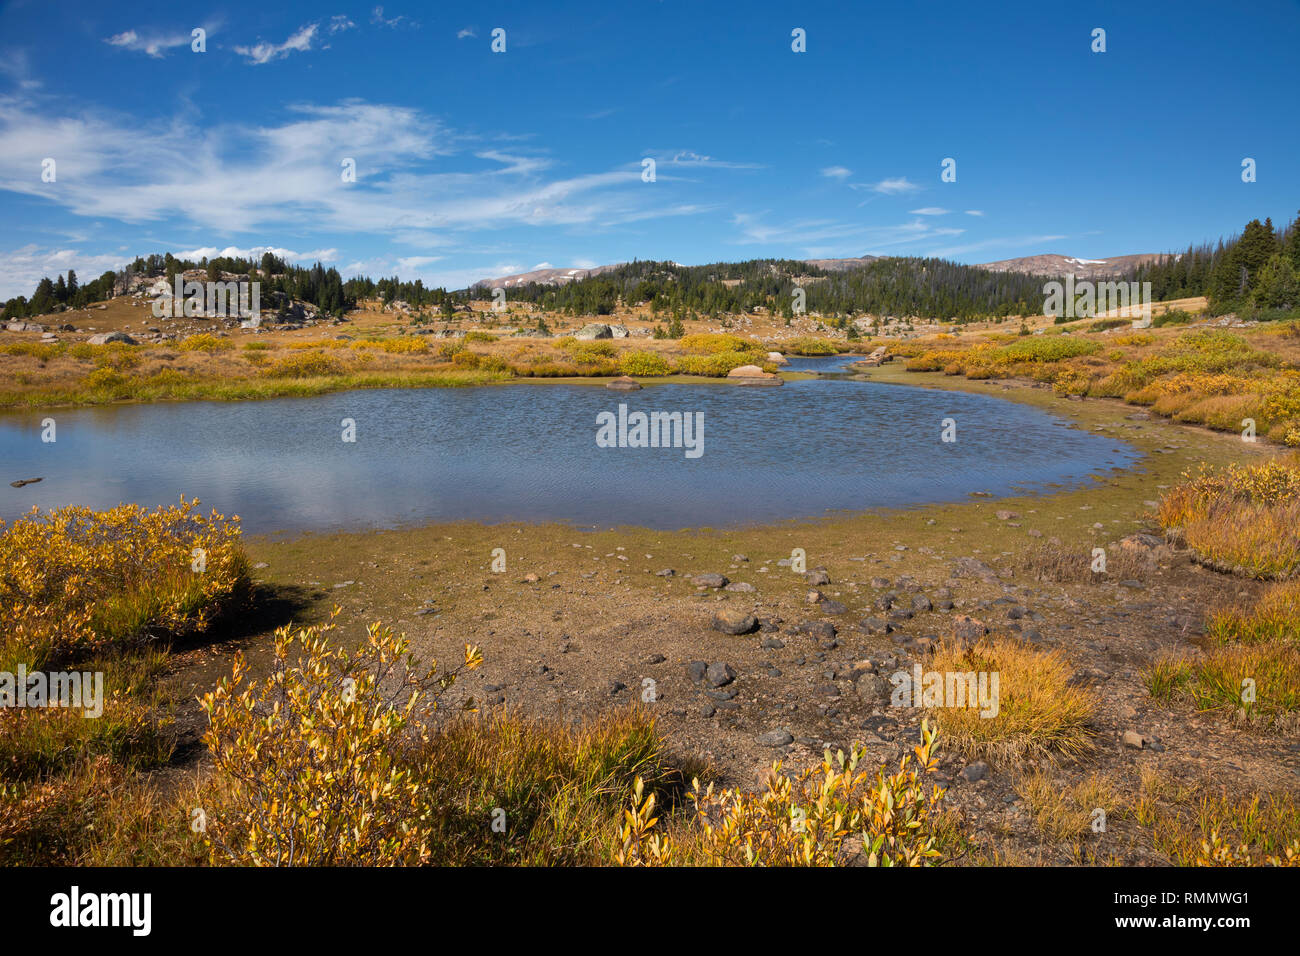 WY03738-00...WYOMING - Small pond near Chain Lakes along the Beartooth Highway in the Shoshone National Forest. Stock Photo